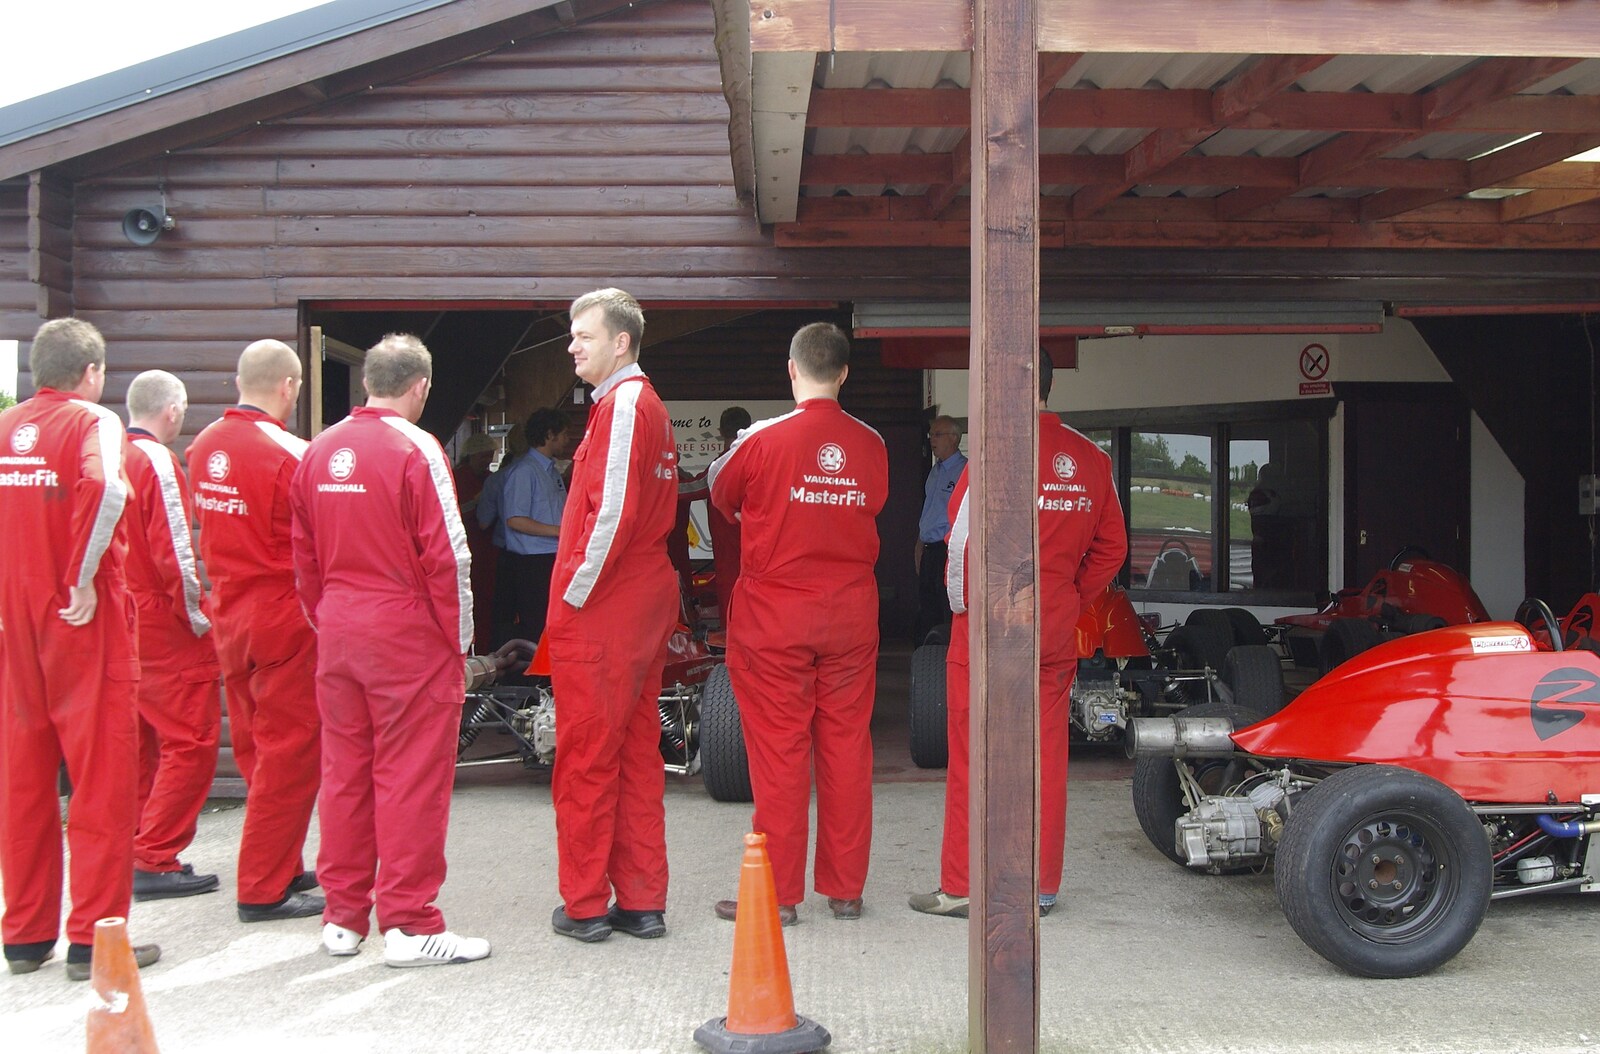 A scrum of drivers by the garage from Driving a Racing Car, Three Sisters Racetrack, Wigan, Lancashire - 24th June 2008